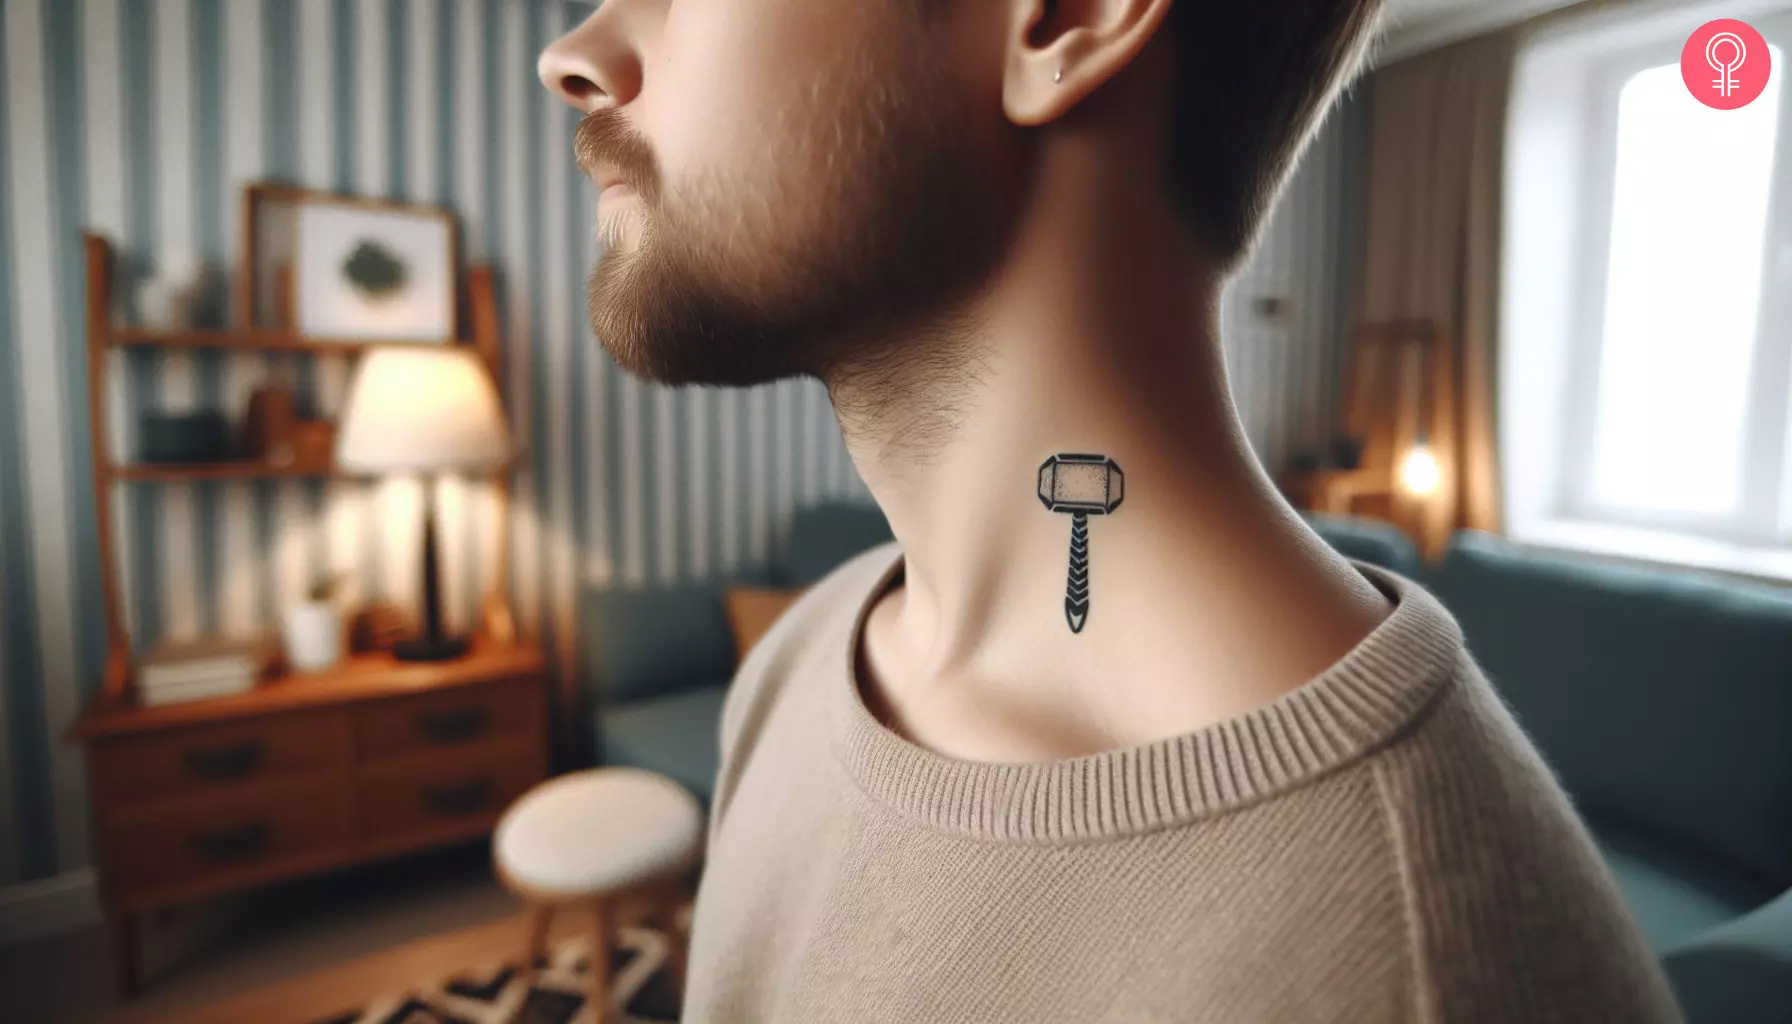 Small Thor’s hammer tattoo on the neck